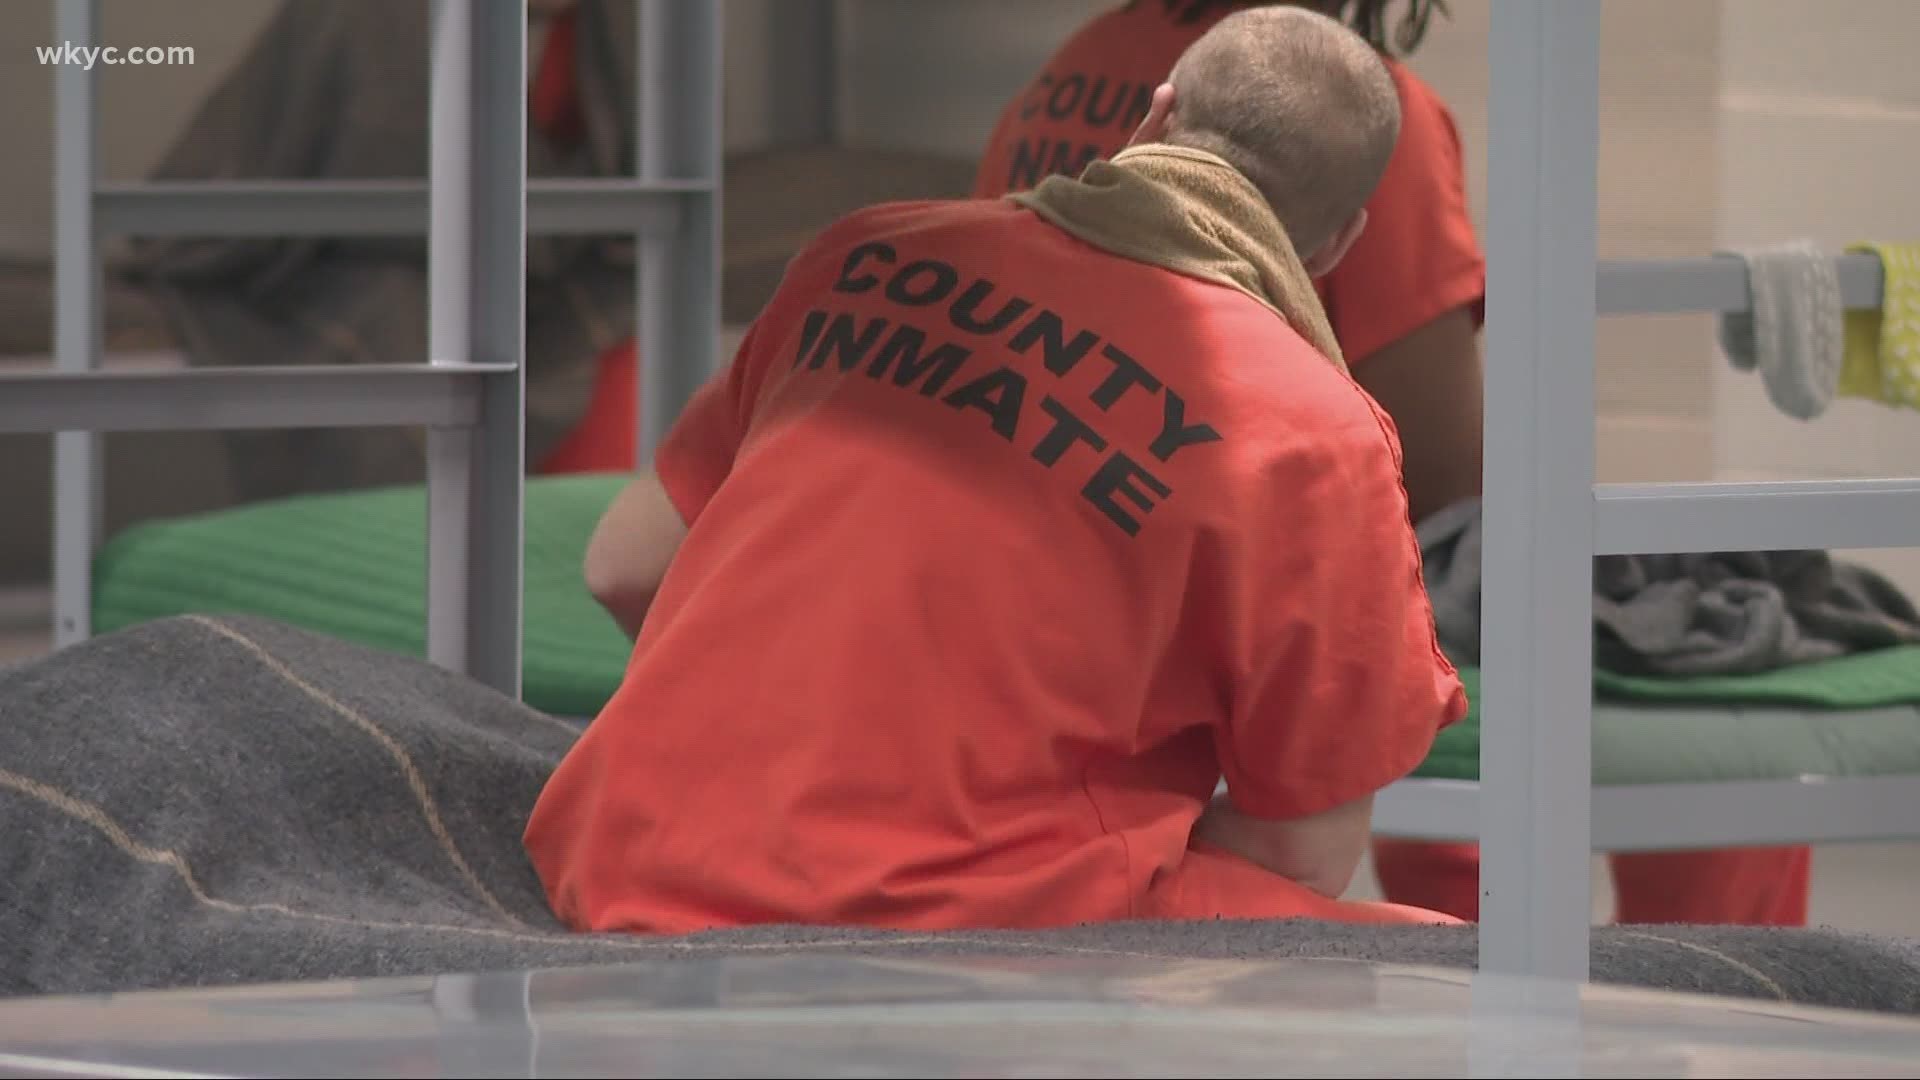 There are new accusations in a legal document by the state against the former director of the Cuyahoga County jail. Consumer Investigator Danielle Serino reports.